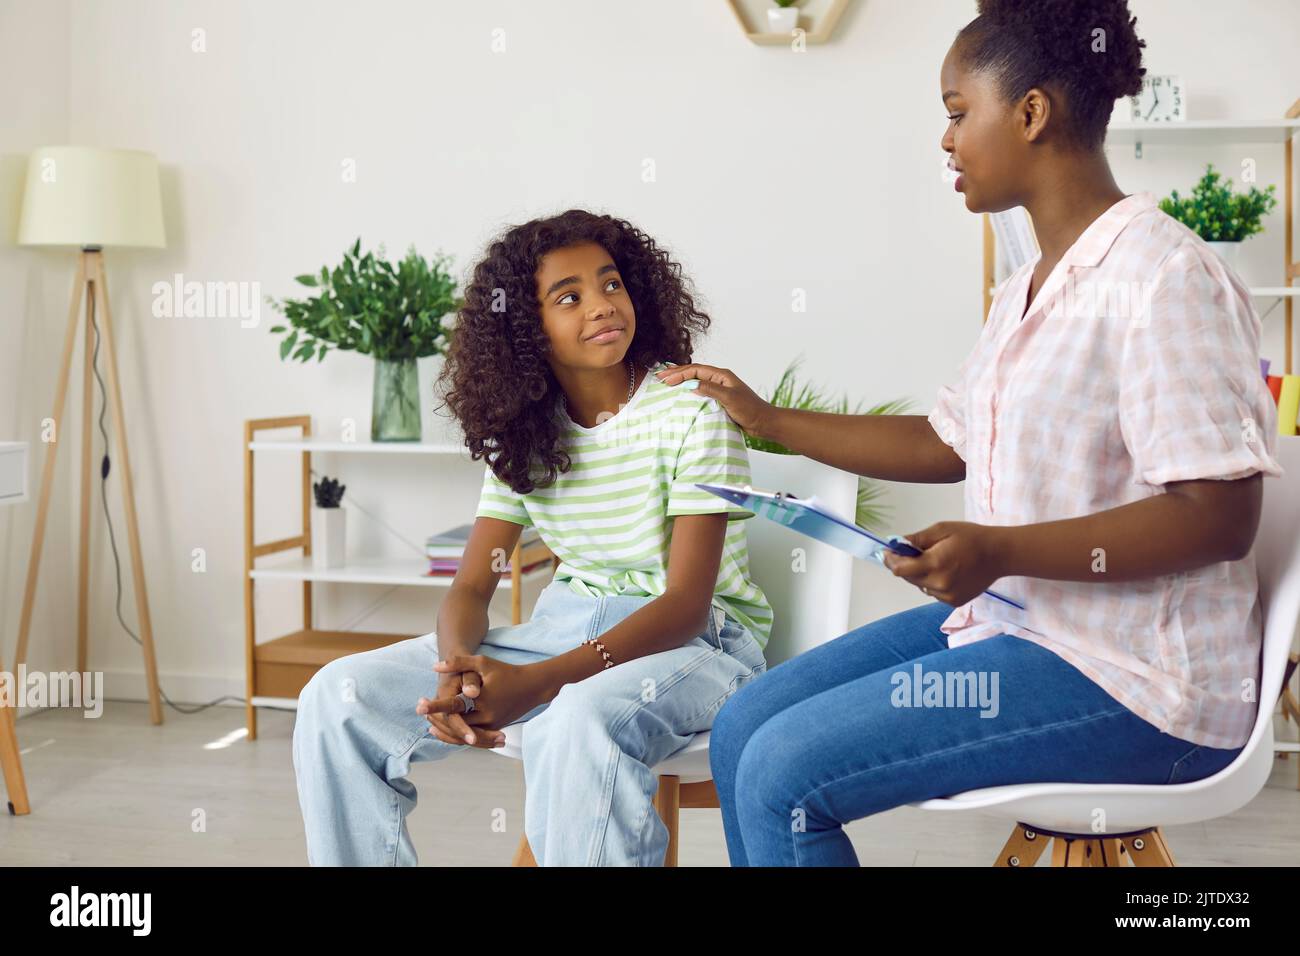 Smiling dark-skinned teenage girl attends therapy session with young female child psychologist. Stock Photo